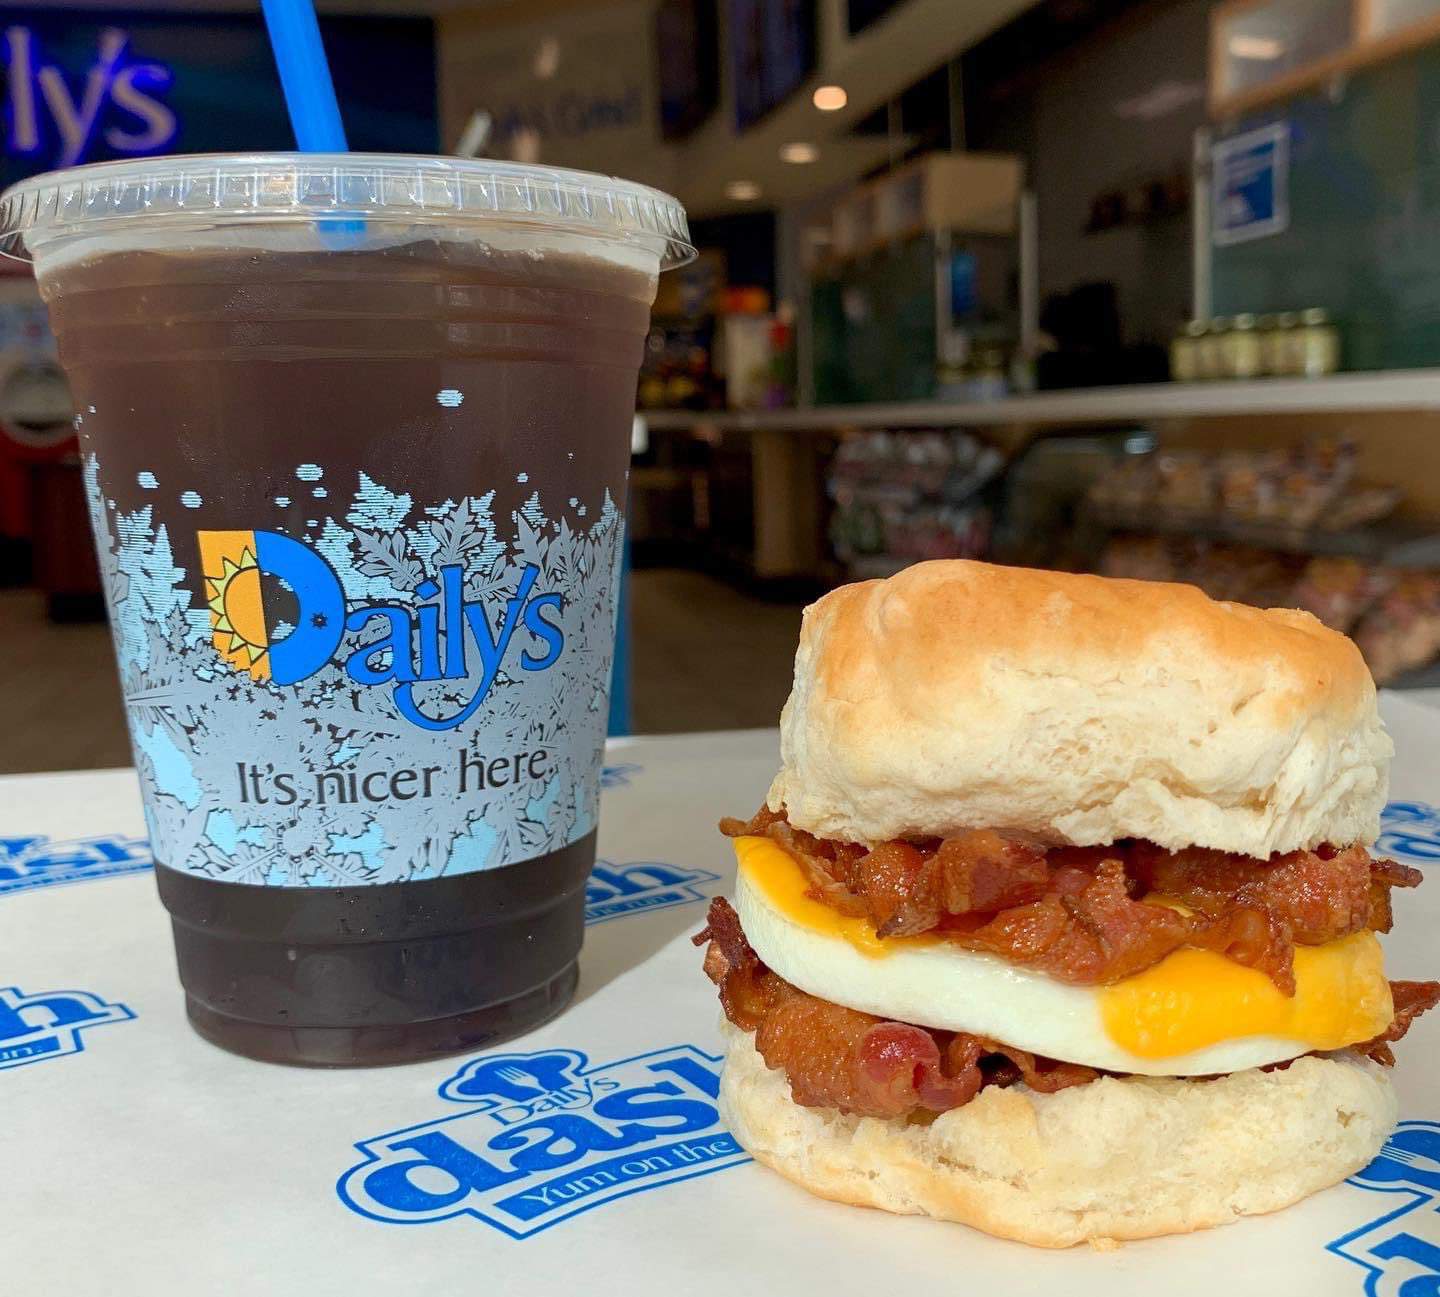 Freebie: Daily’s Dash locations giveaway free specialty coffees Tuesday